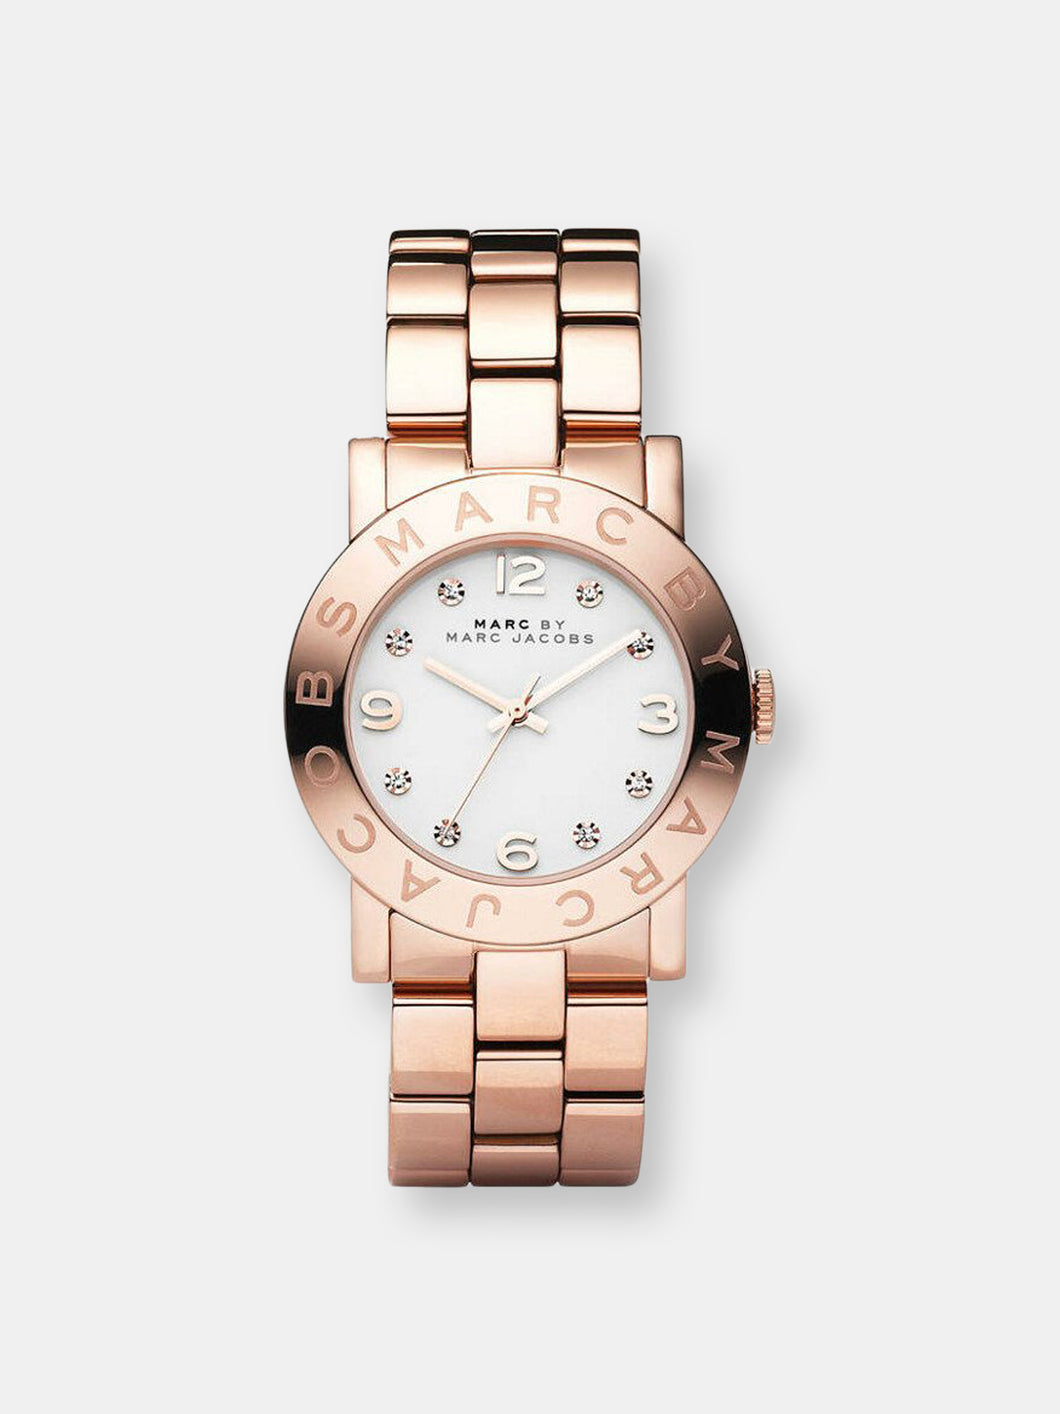 Marc by Marc Jacobs Women's MBM3077 Rose Gold Stainless-Steel Quartz Fashion Watch